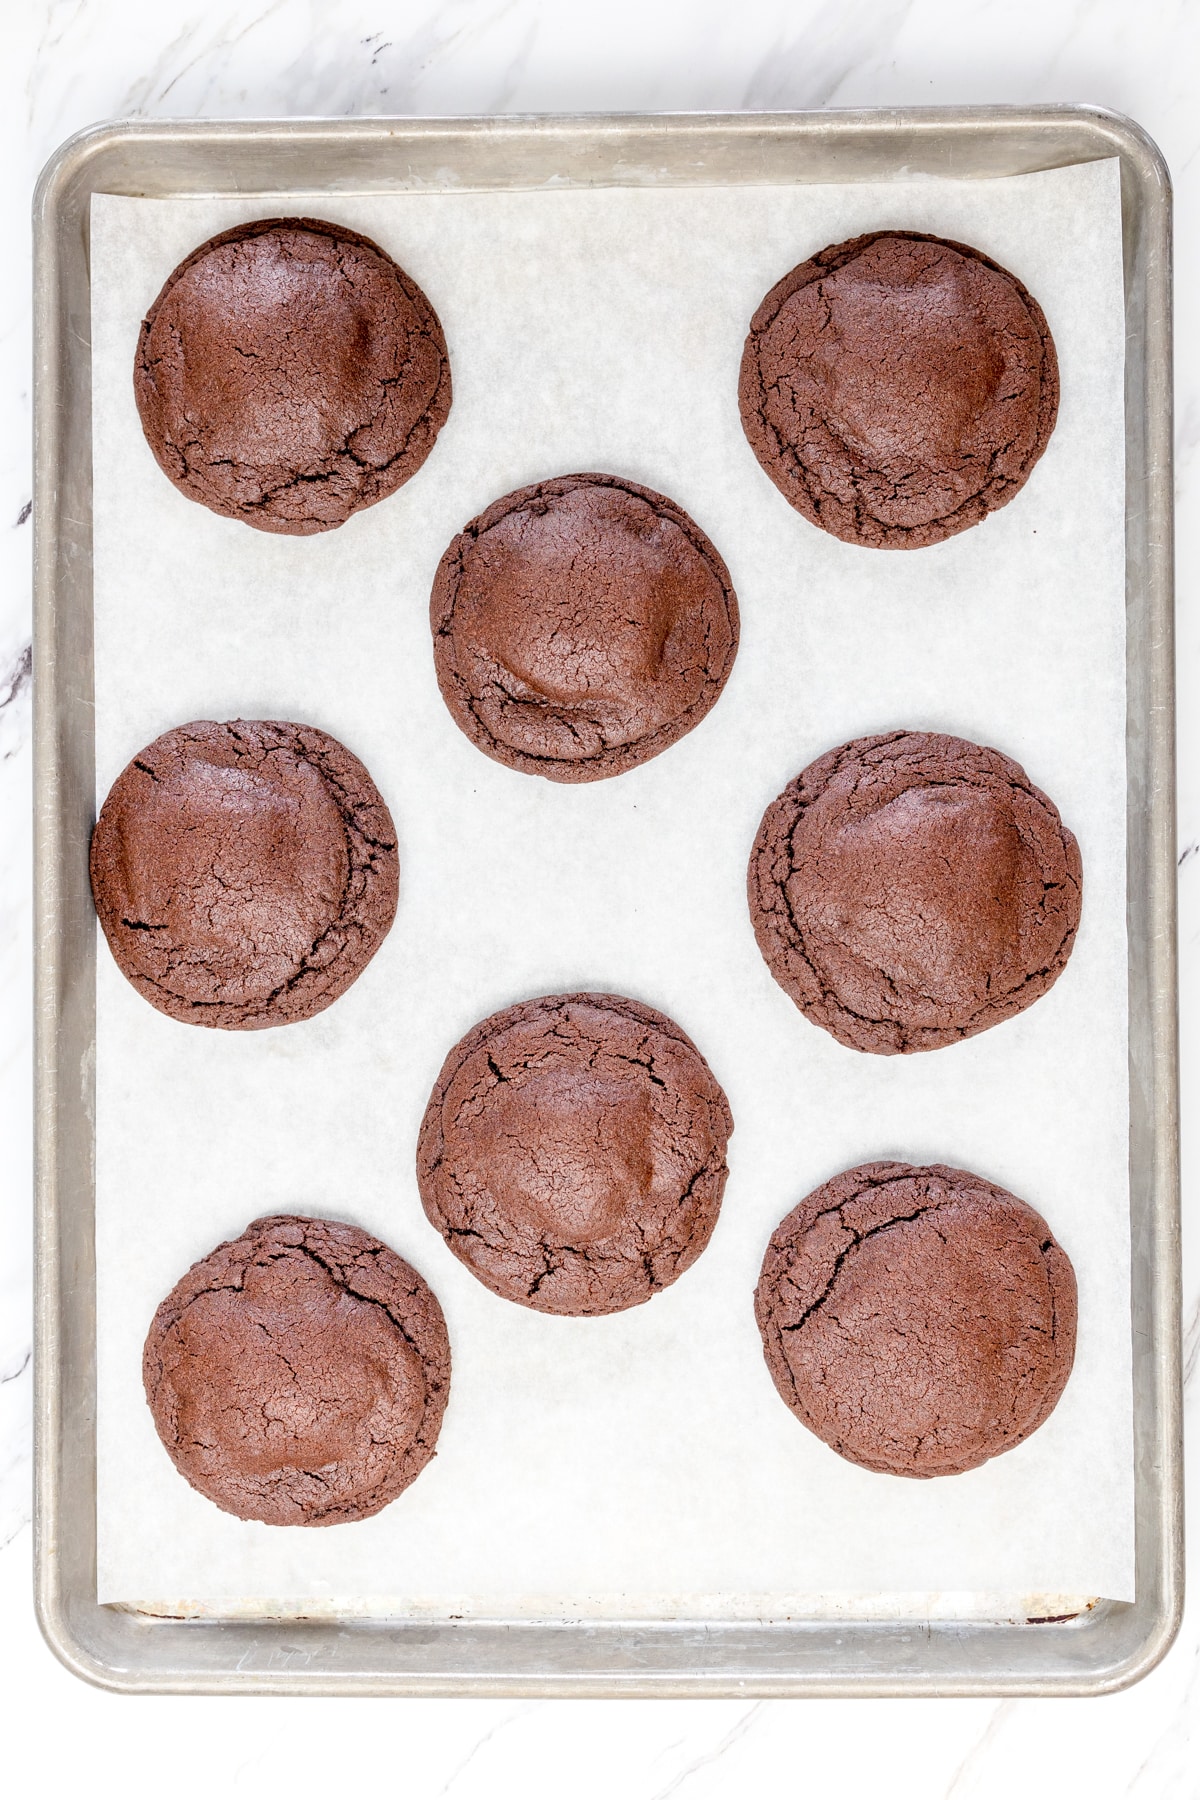 Top view of peppermint patty stuffed cookies on a baking tray. 